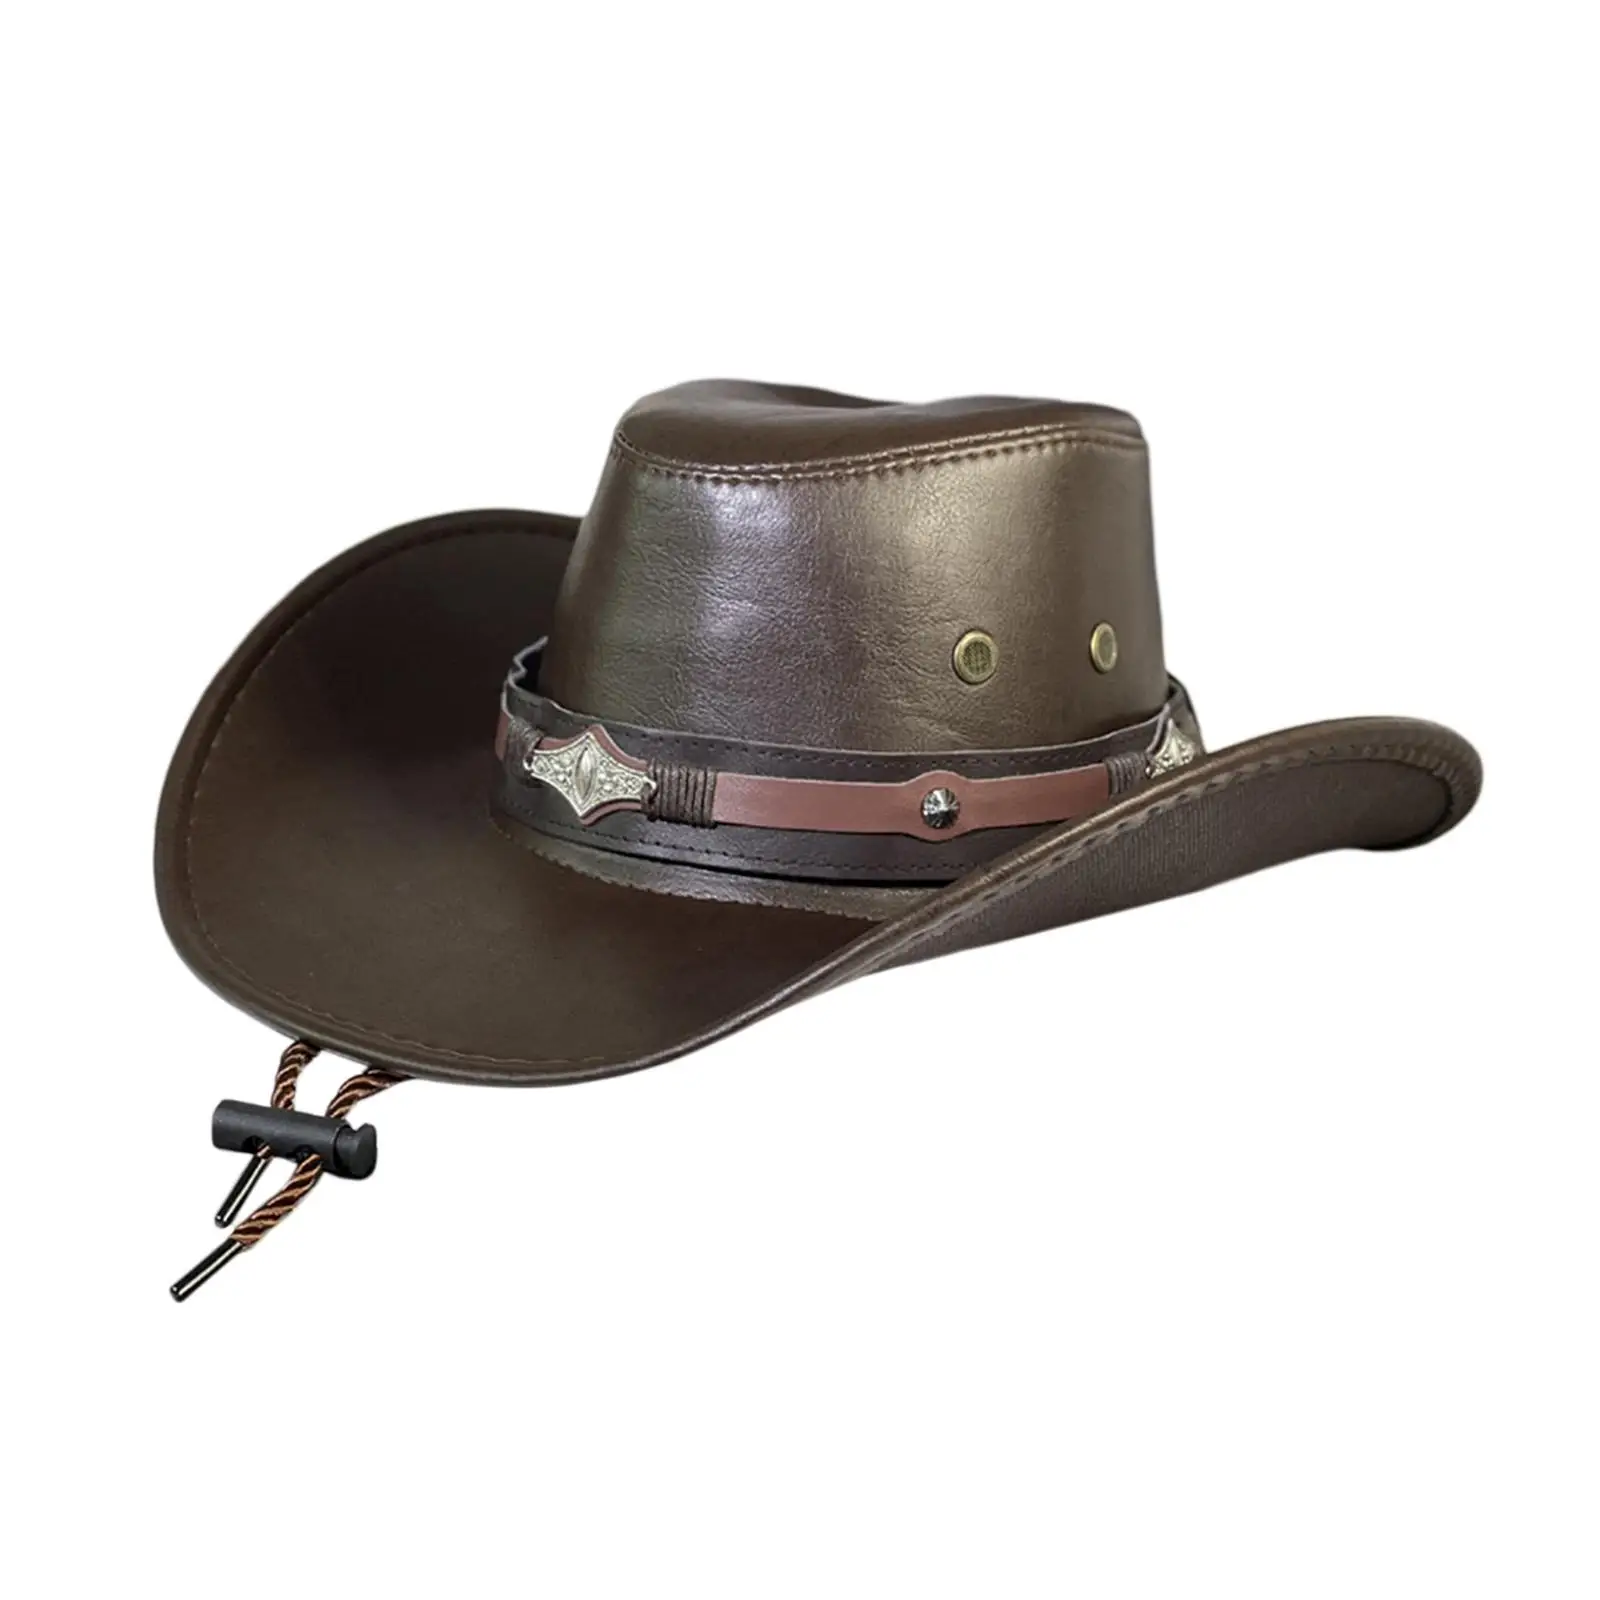 Western  Hat Sun Hat Durable PU Leather Hats Gentleman Jazz Hats with Chin Strap for Halloween Stage Performance Props